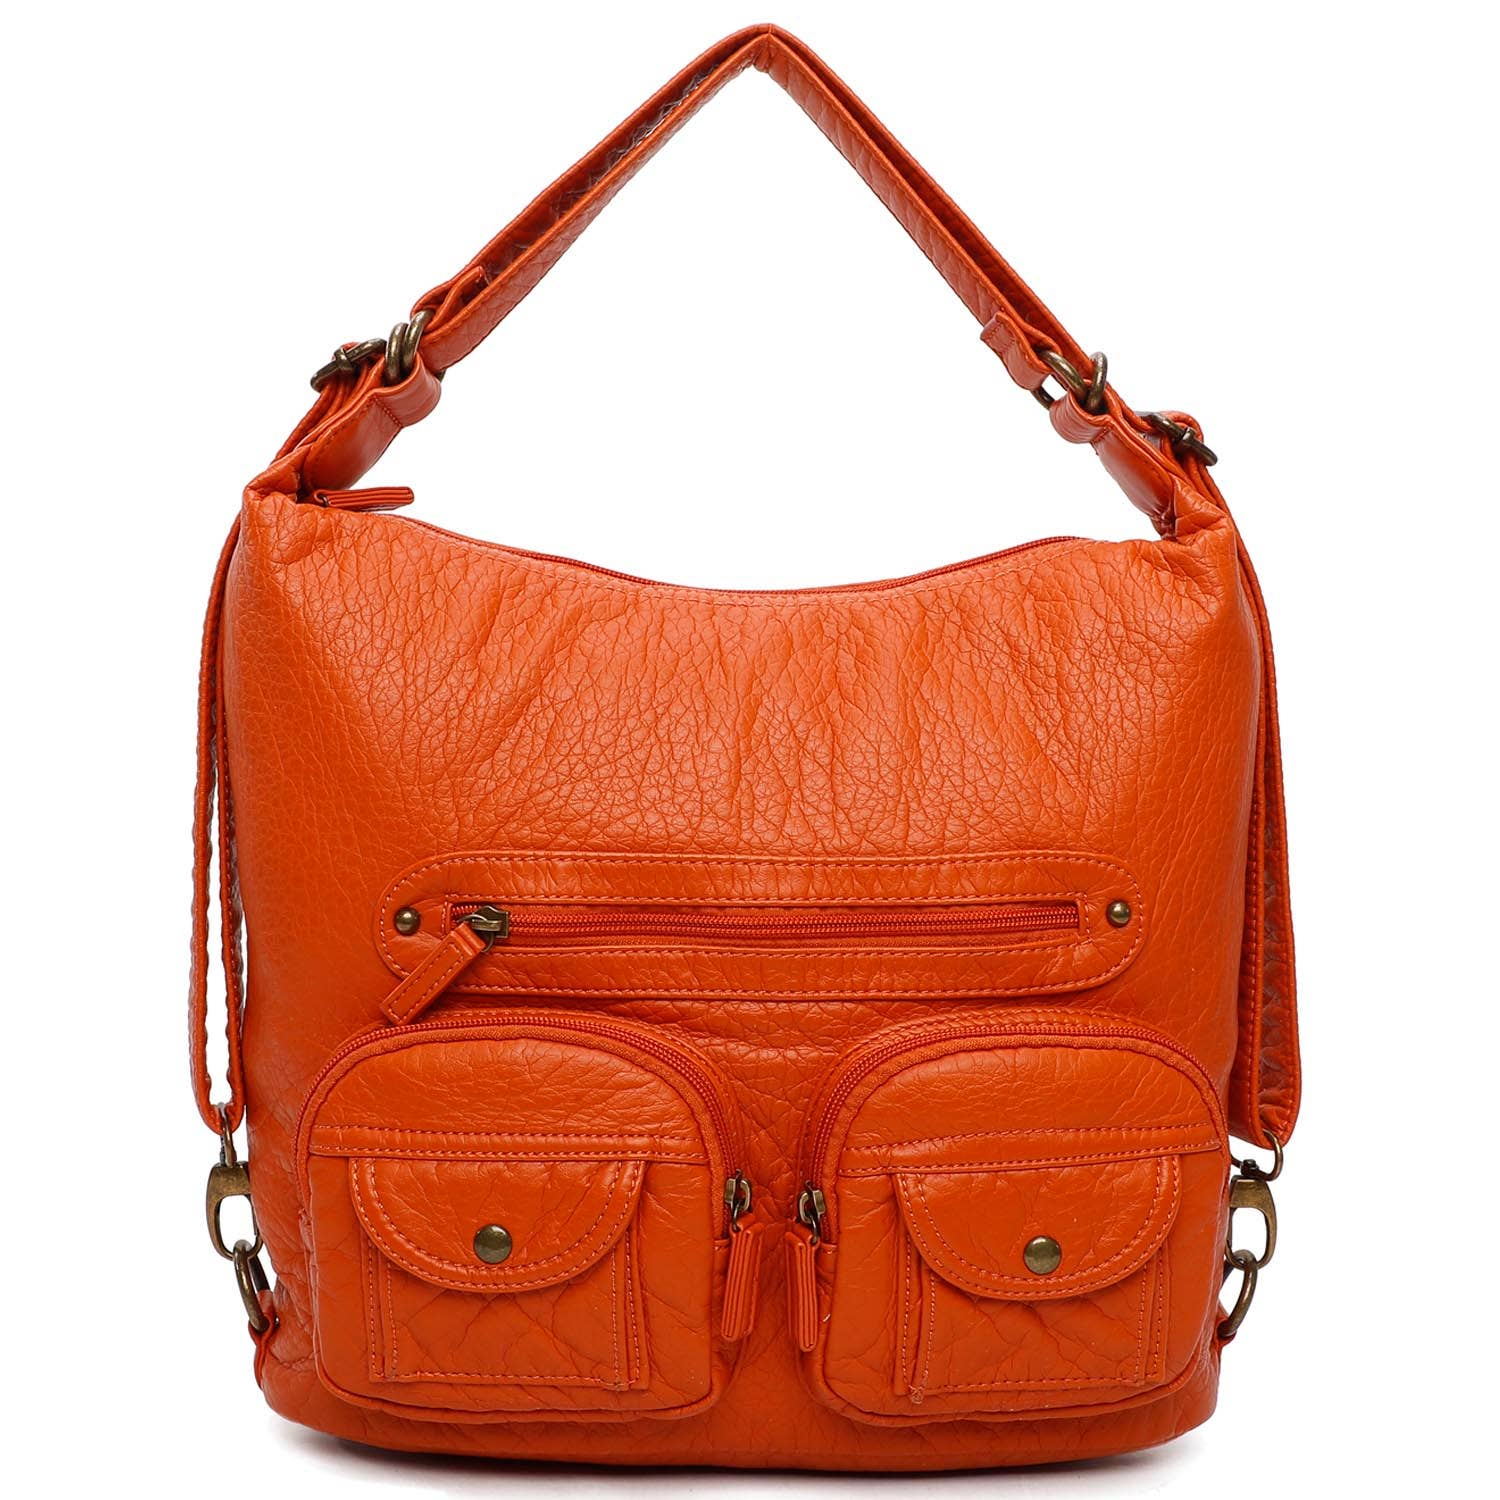 Every Day Convertible 3 in 1 Orange Crossbody Backpack - Coco and lulu boutique 